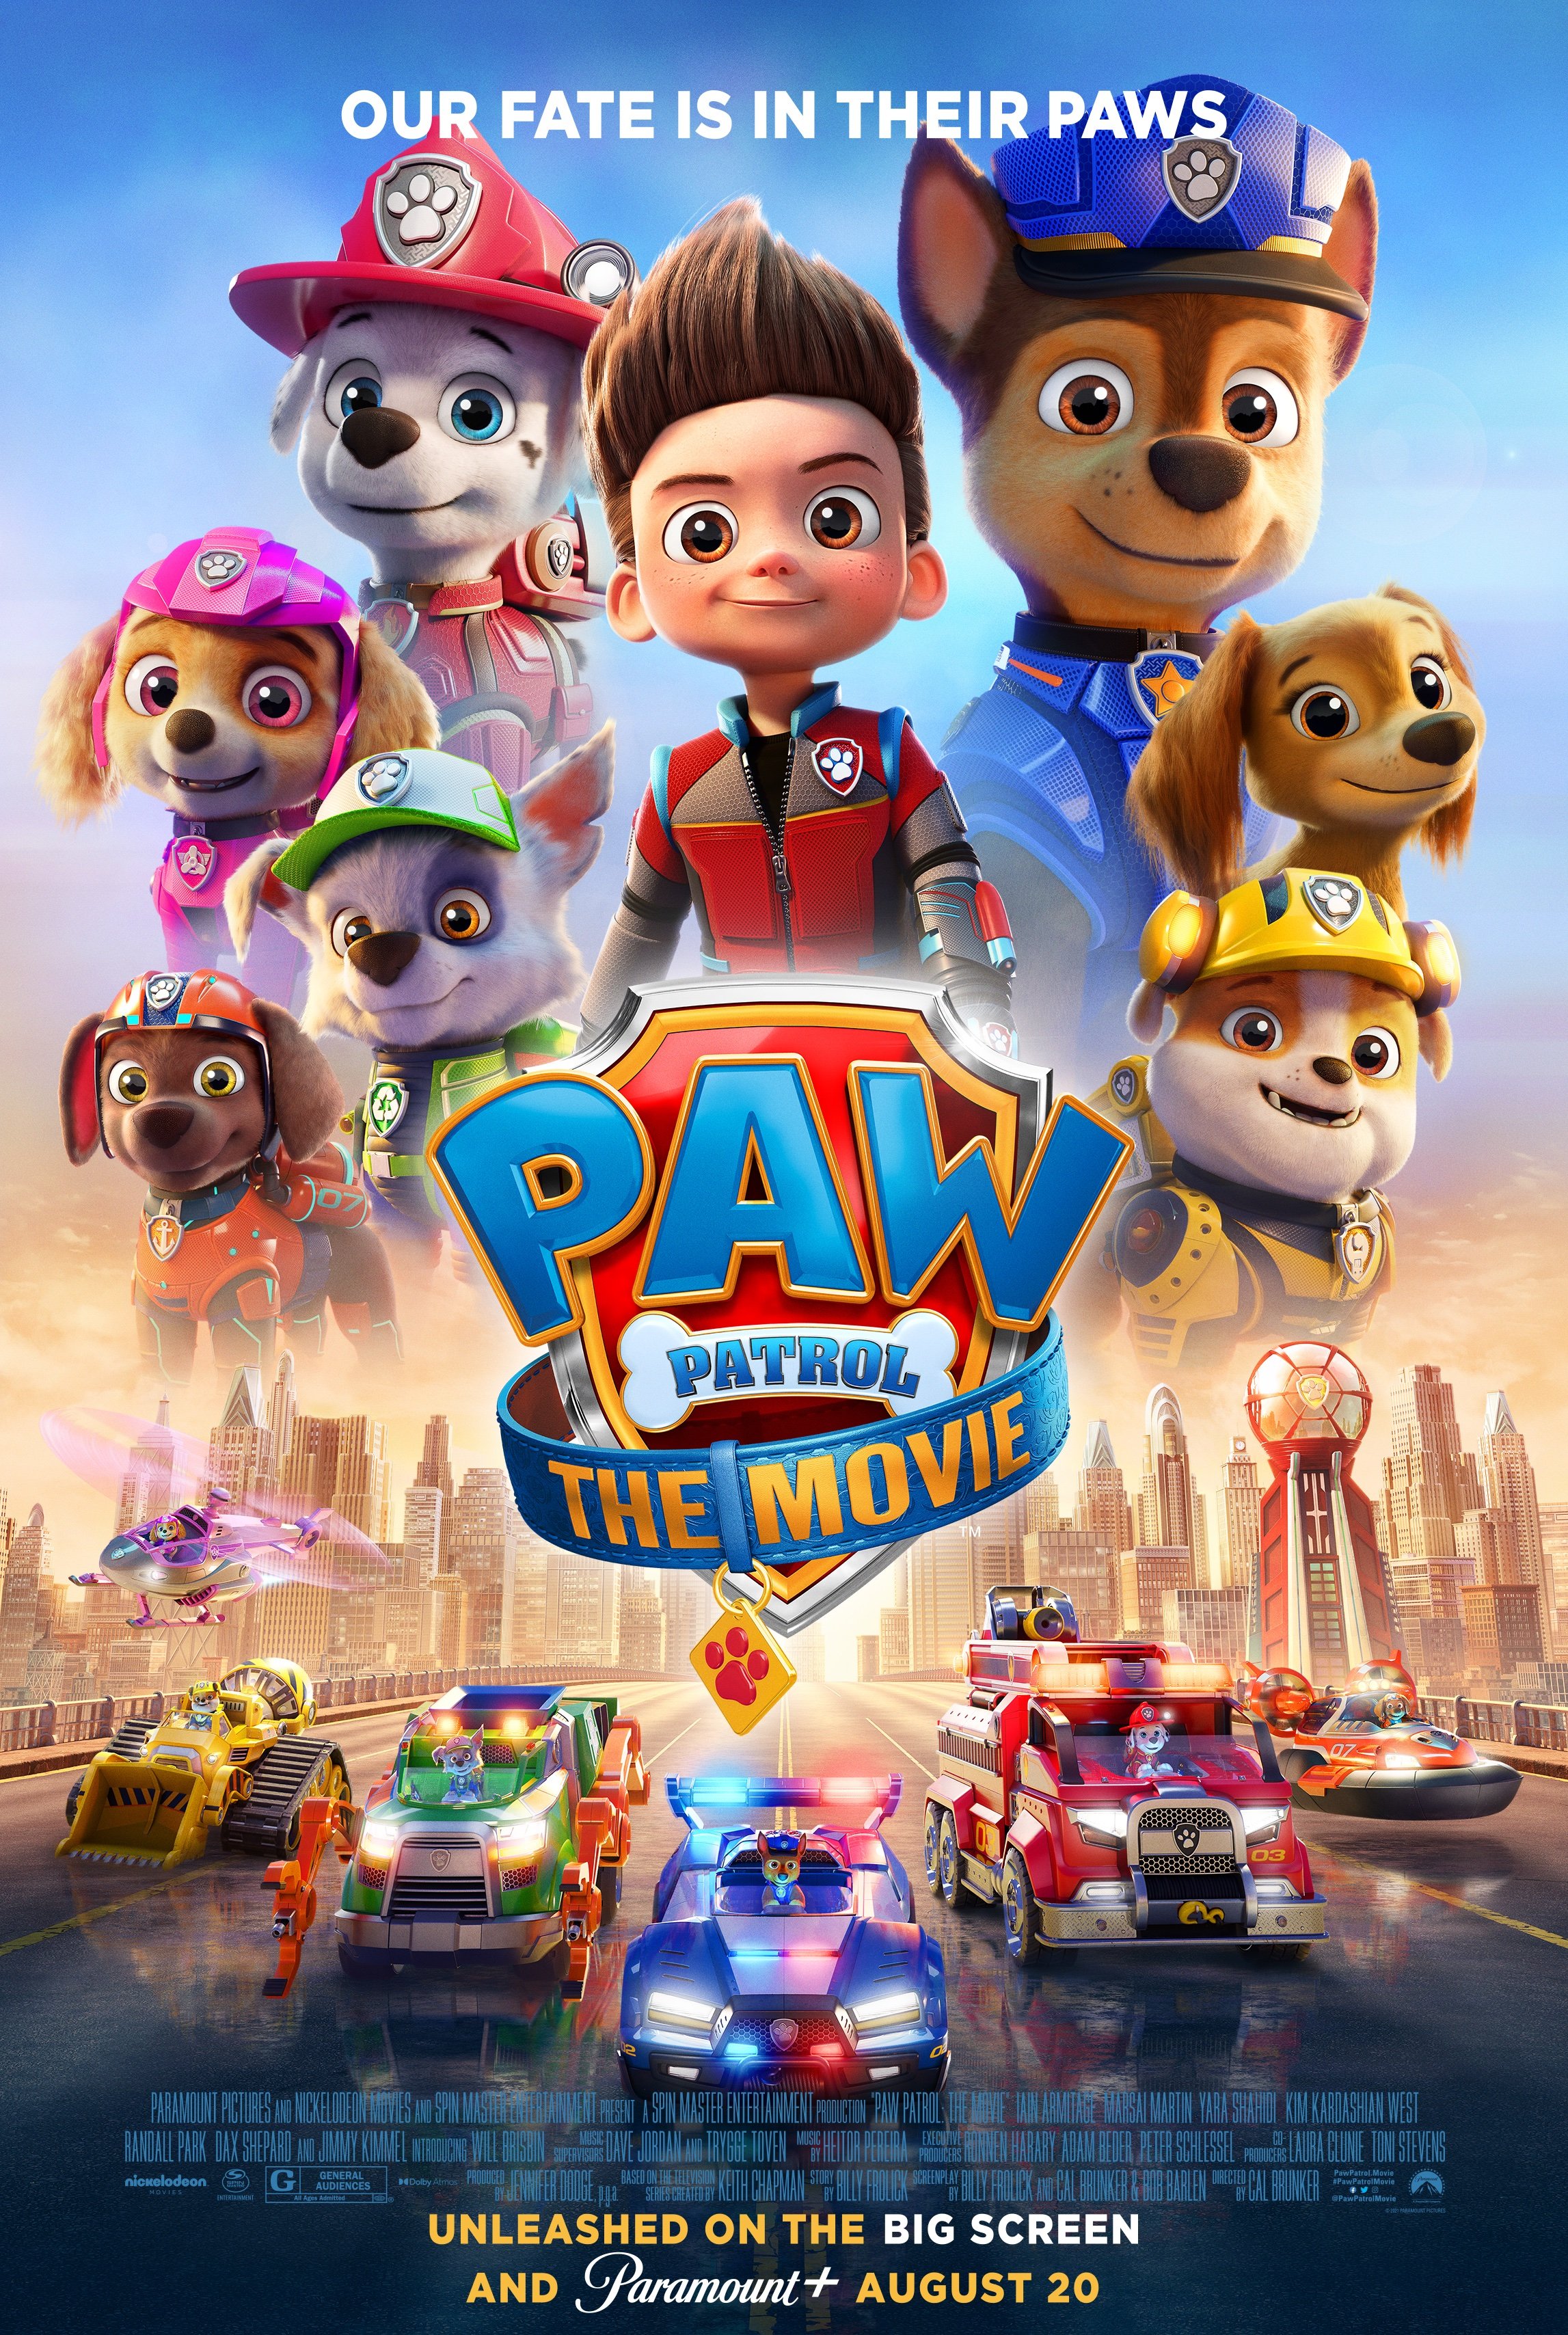 UNO Junior Paw Patrol: The Mighty Movie Kids Card Game for Family Night